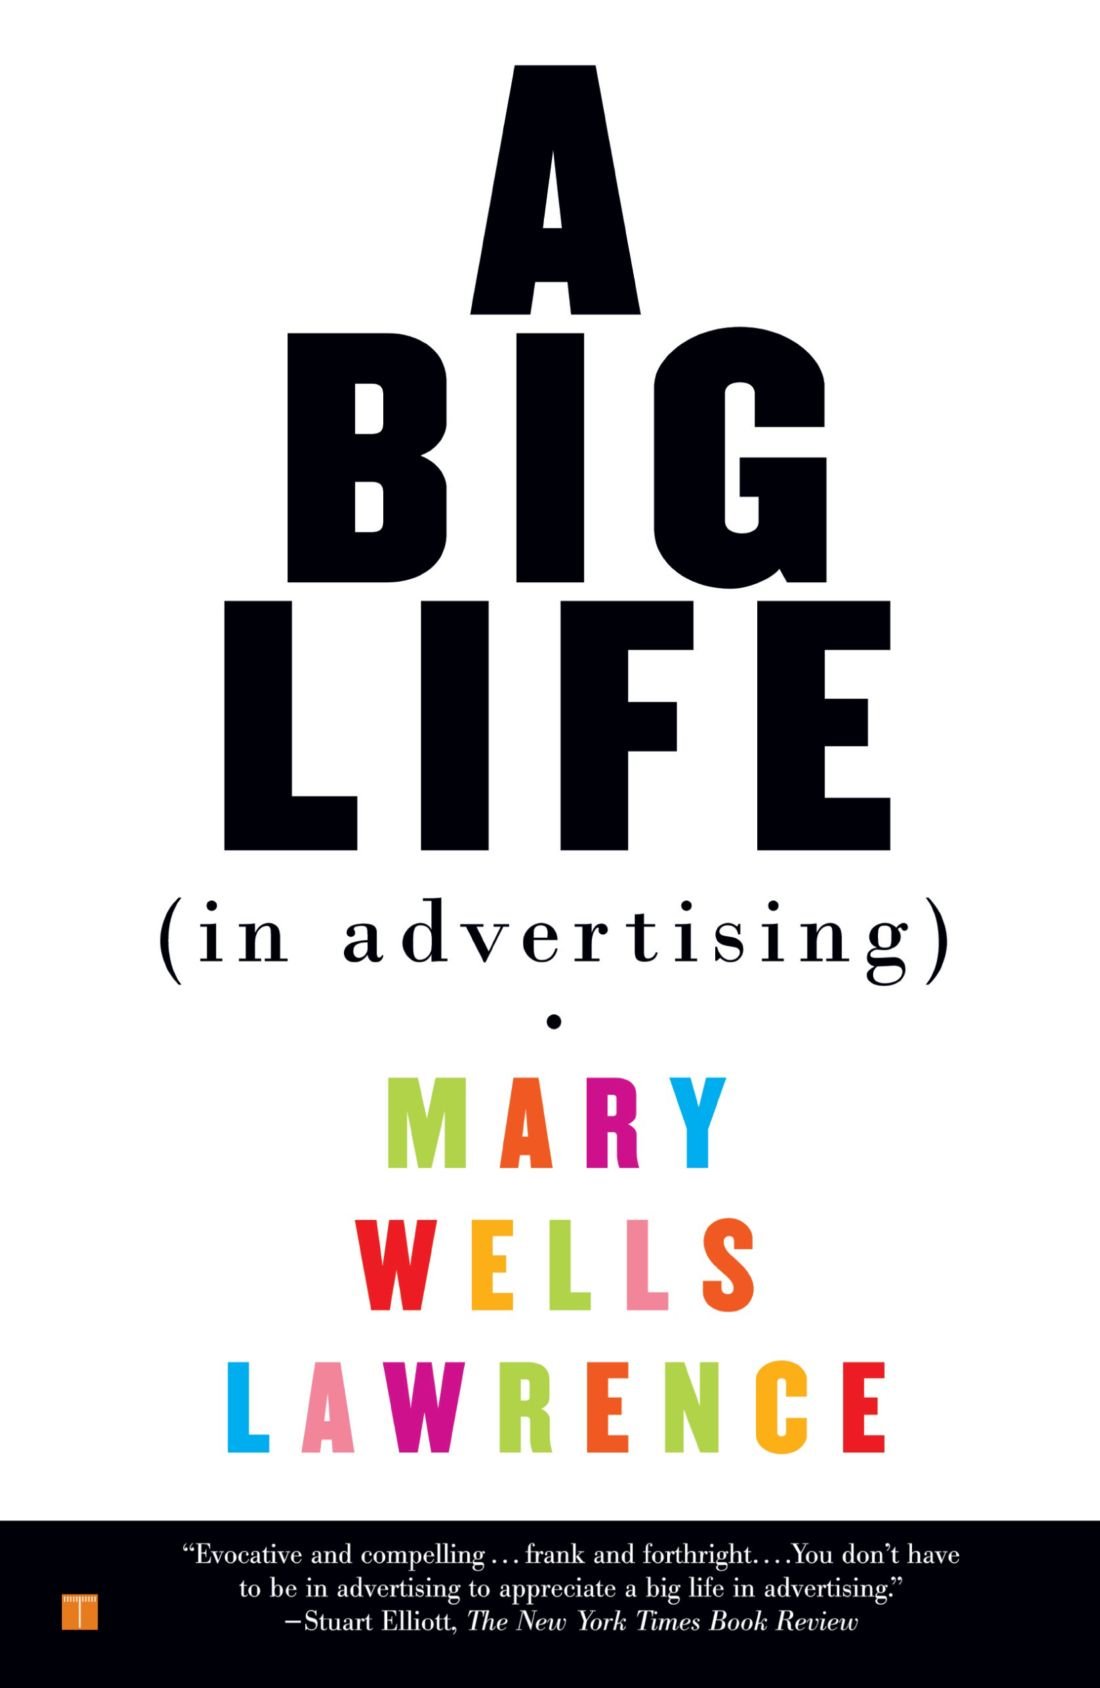 A Big Life In Advertising